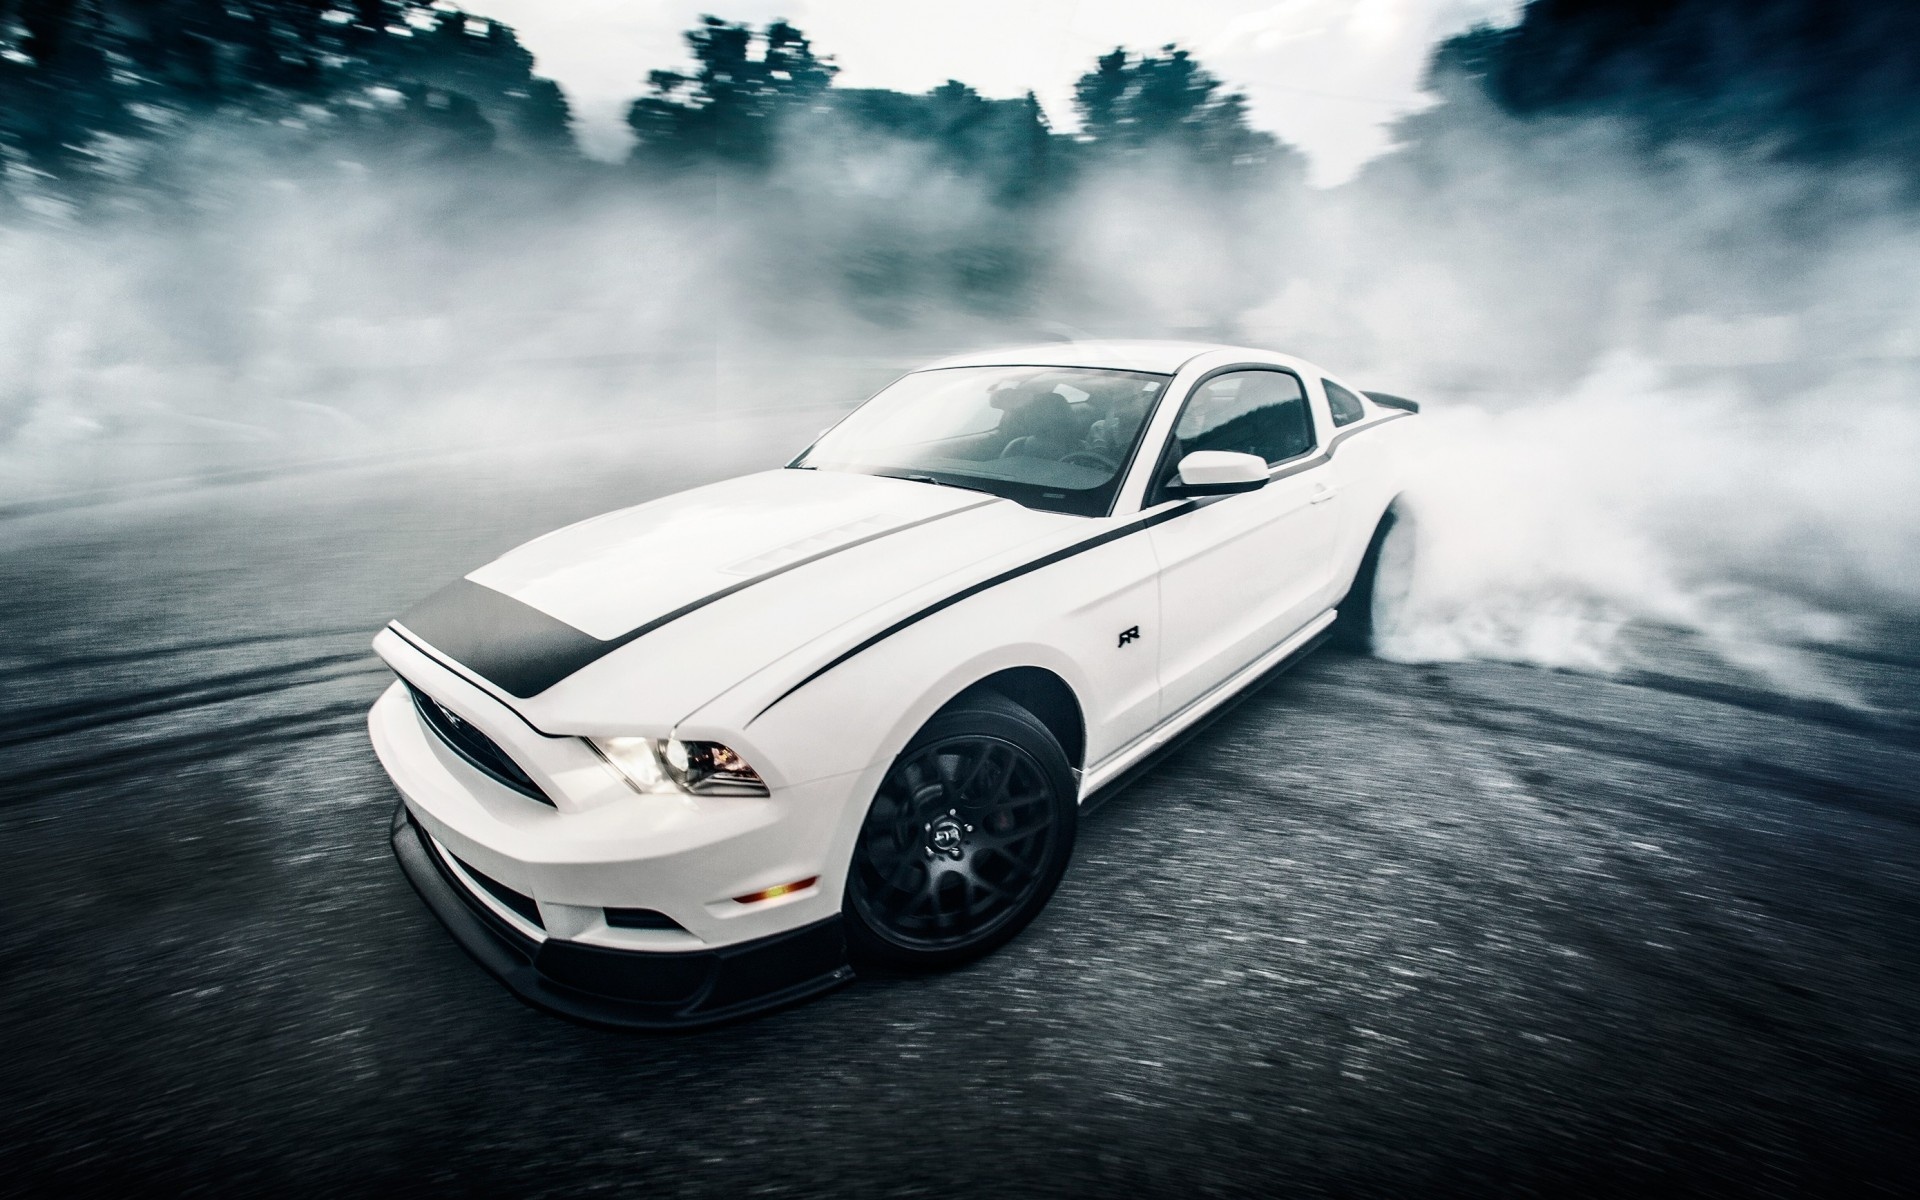 Drifting: White Ford Mustang, Drift in a circle, Smoking tires, Musclecar. 1920x1200 HD Background.